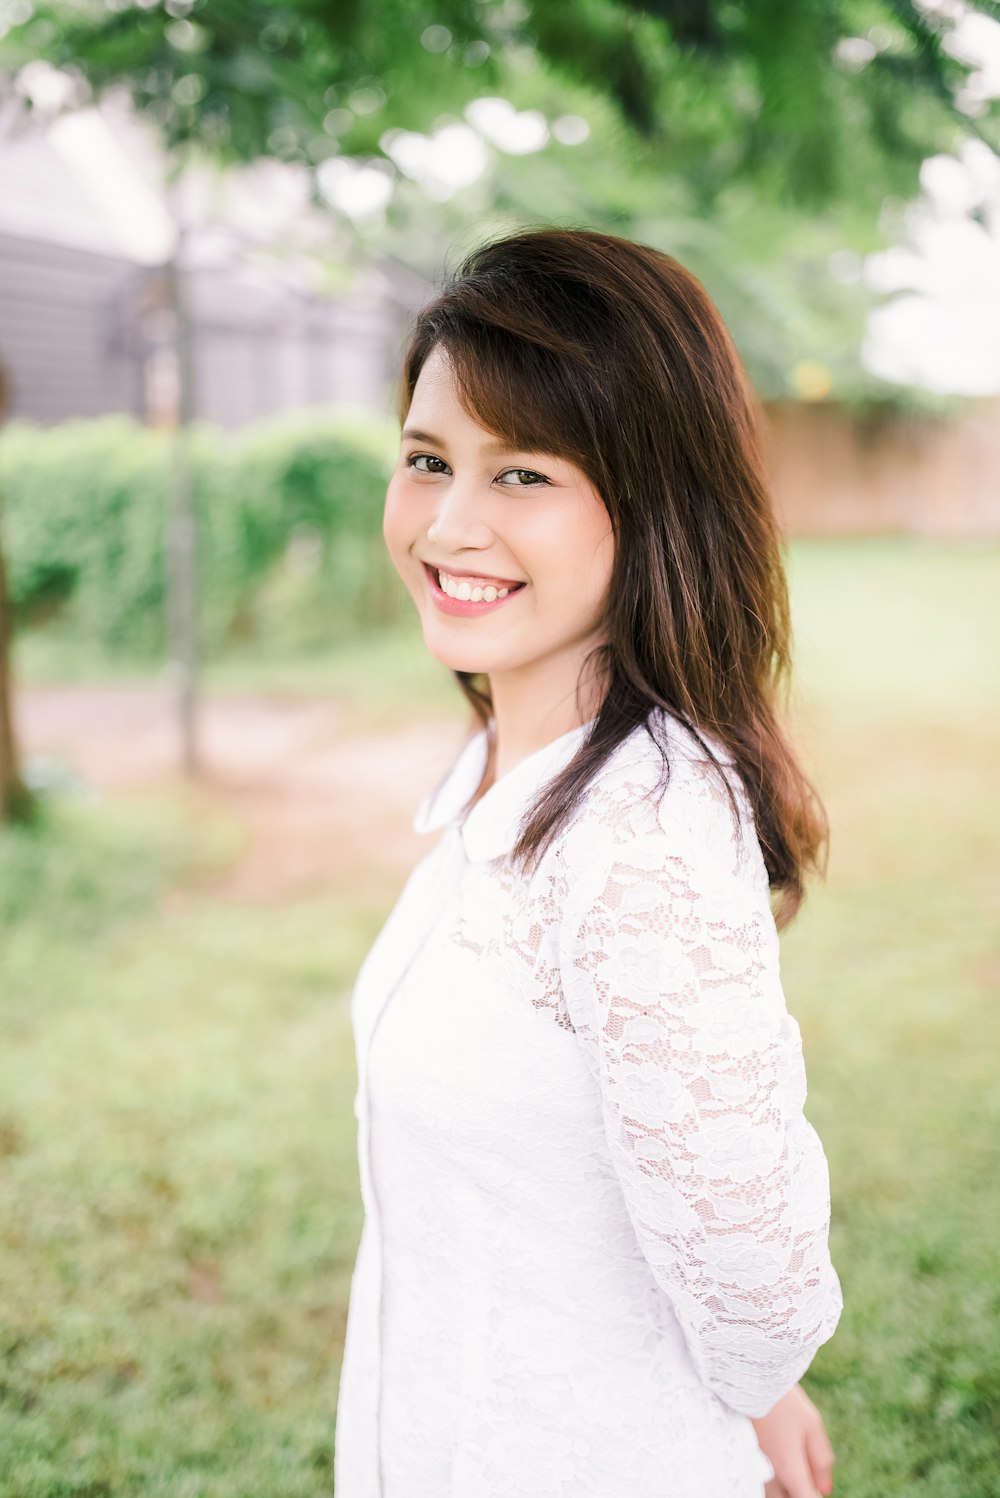 woman in white long sleeve shirt smiling